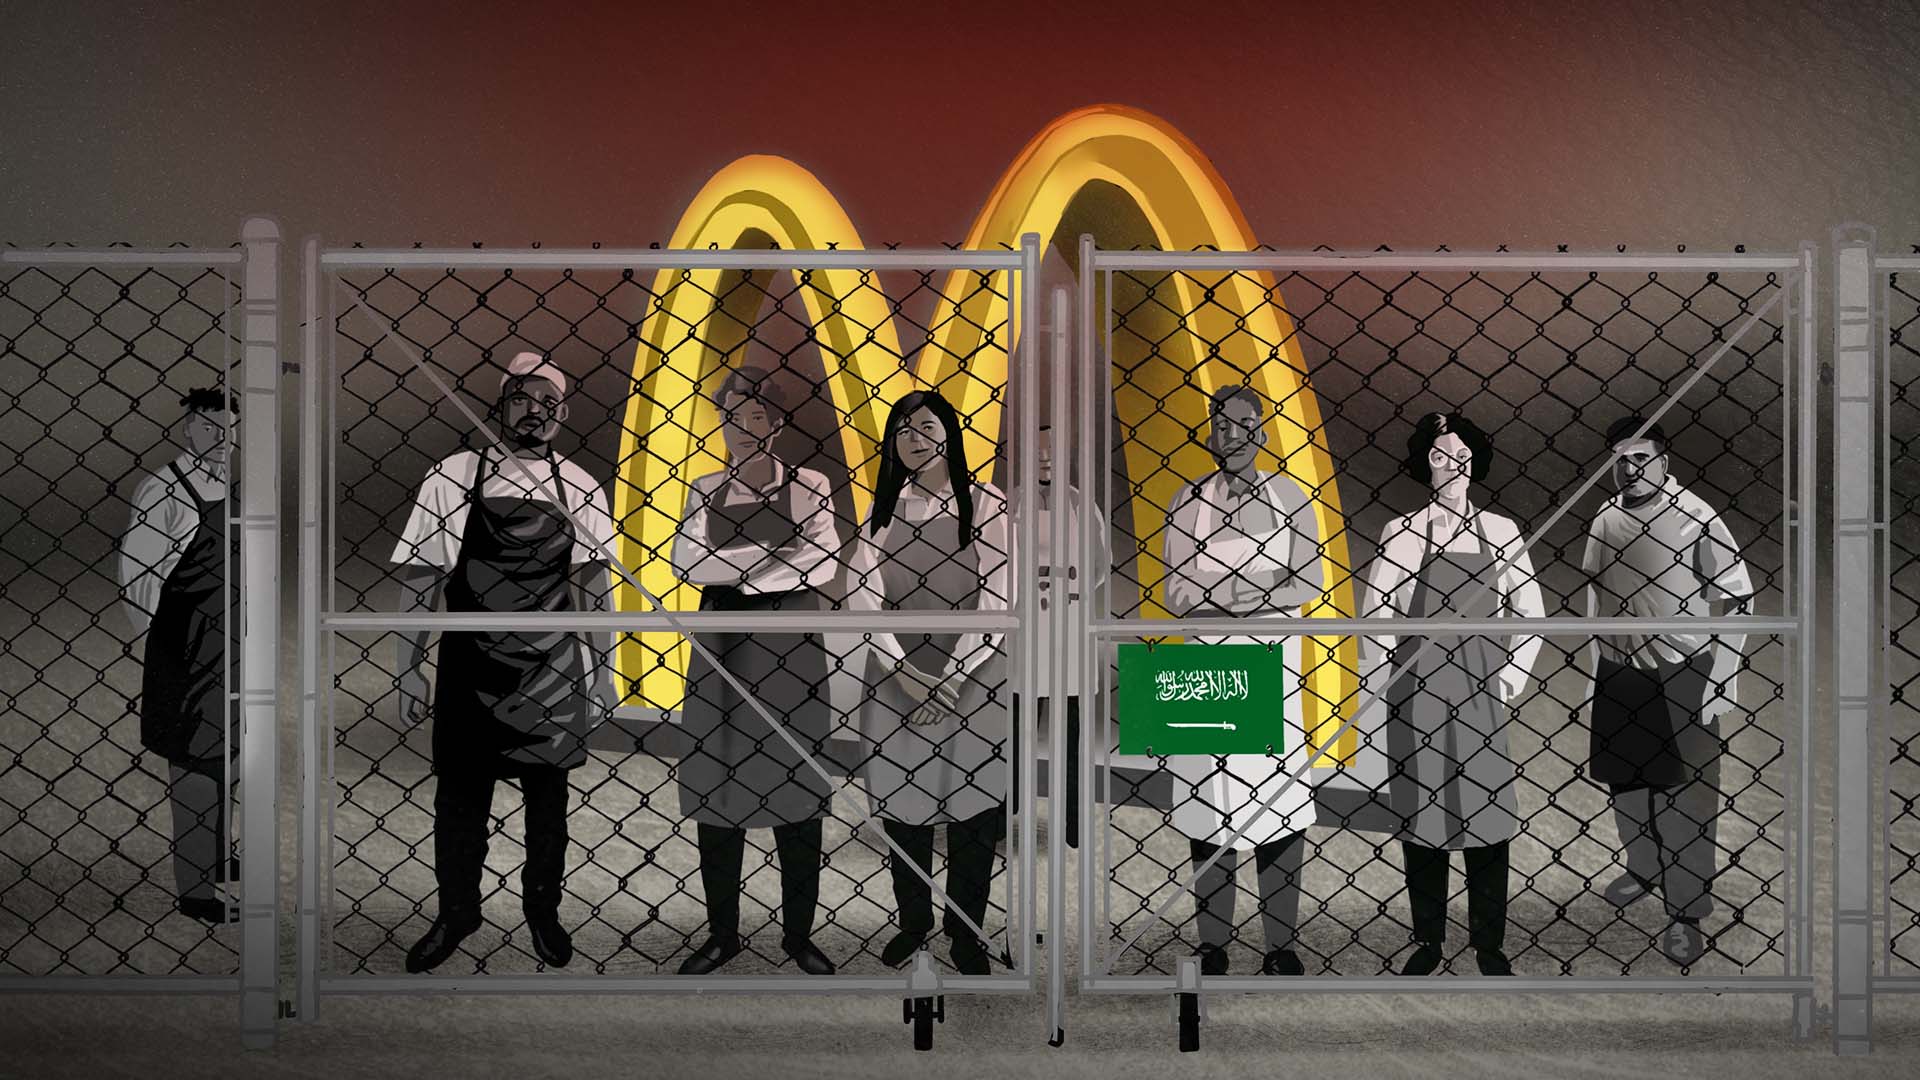 A crowd of workers in front of a looming McDonald's "M" looking out from behind a chain-link fence.